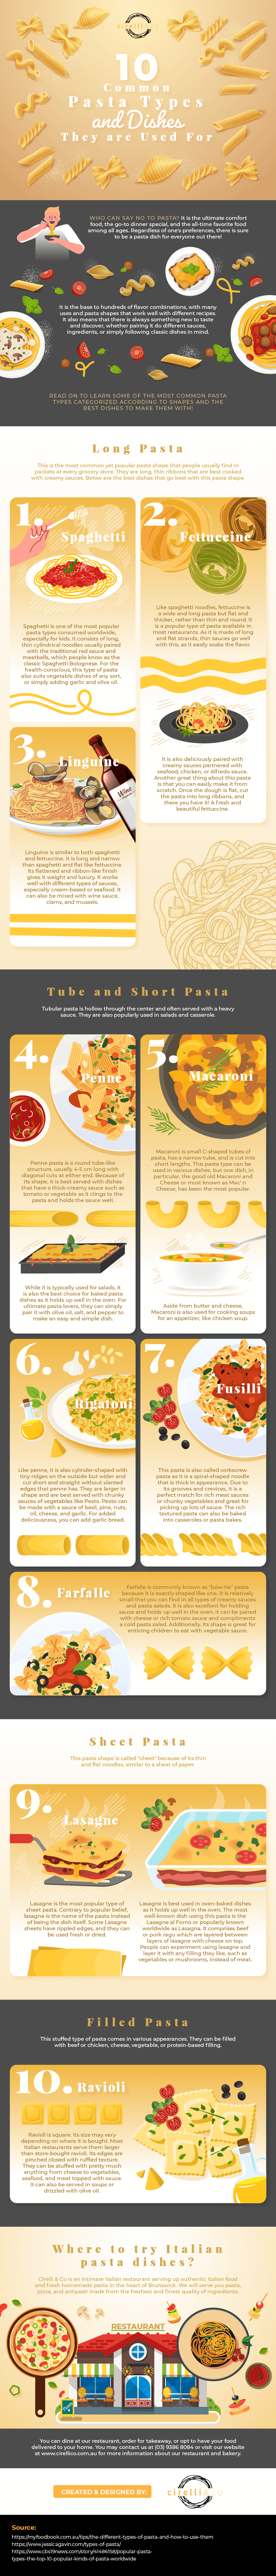 10 Common Pasta Types and Dishes They are Used For